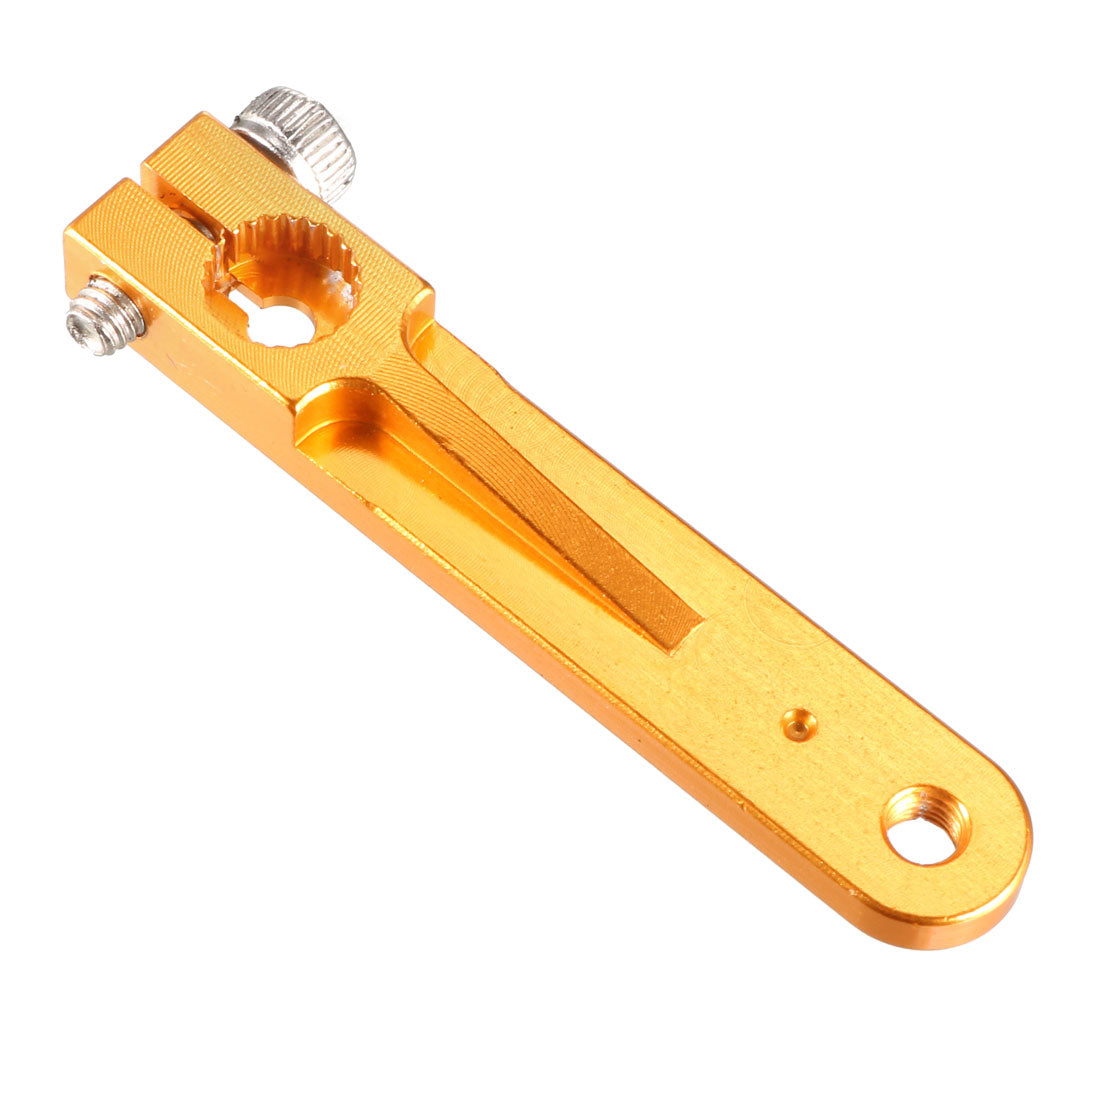 uxcell Uxcell Aluminum Servo Arms Single Arm 23T M3 Thread Yellow, for 1.25 Inch JR